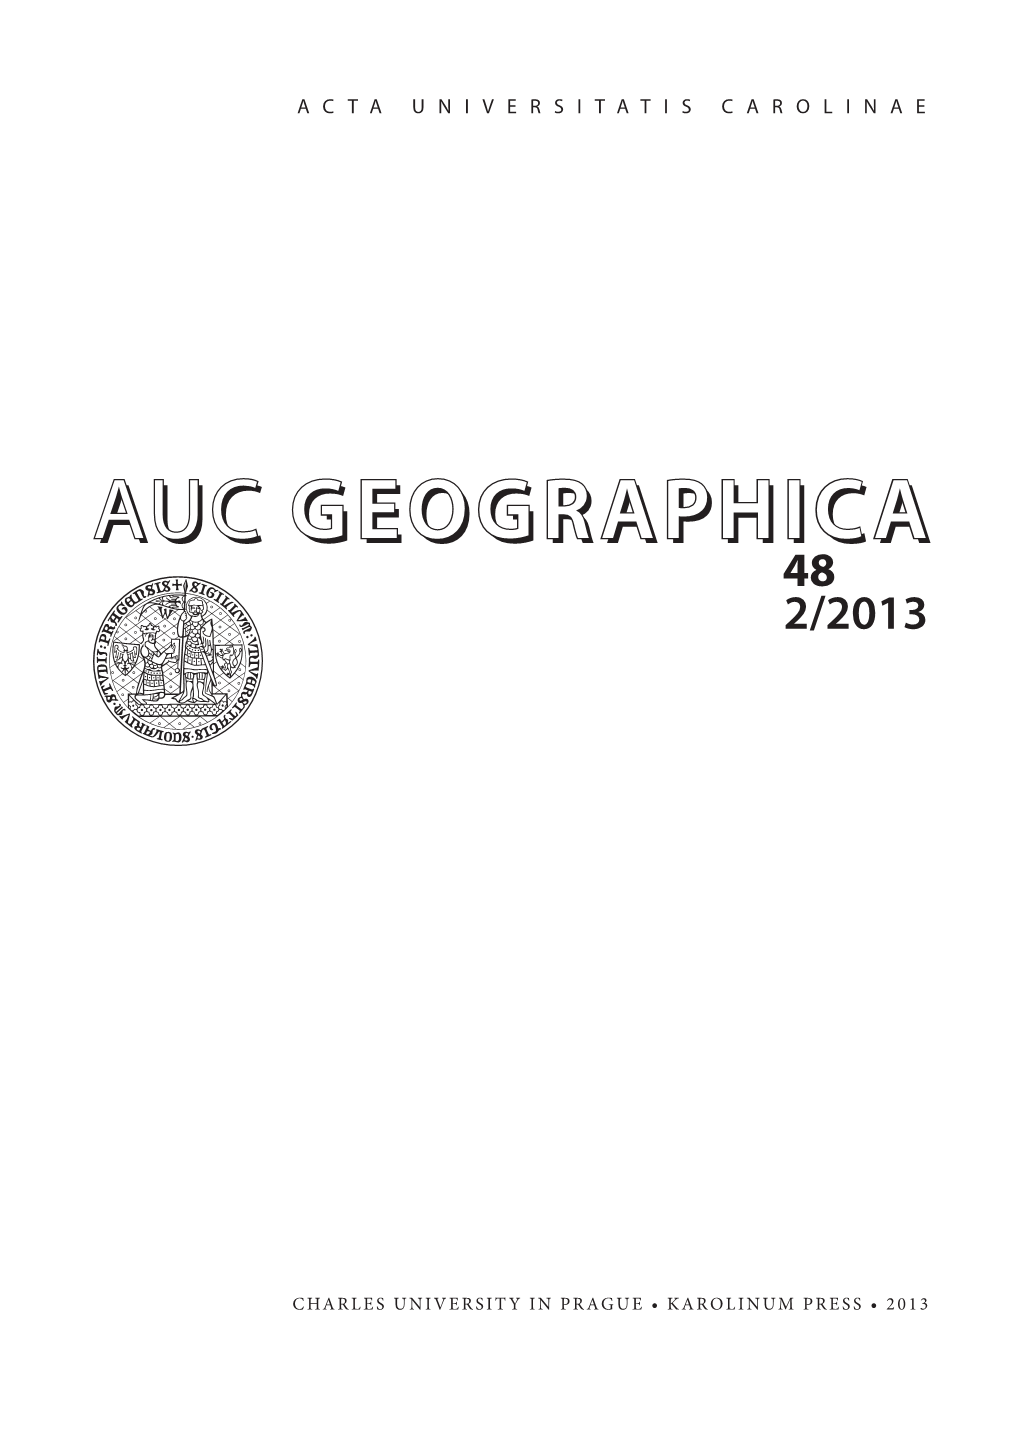 Geographicageographica 48 2/2013